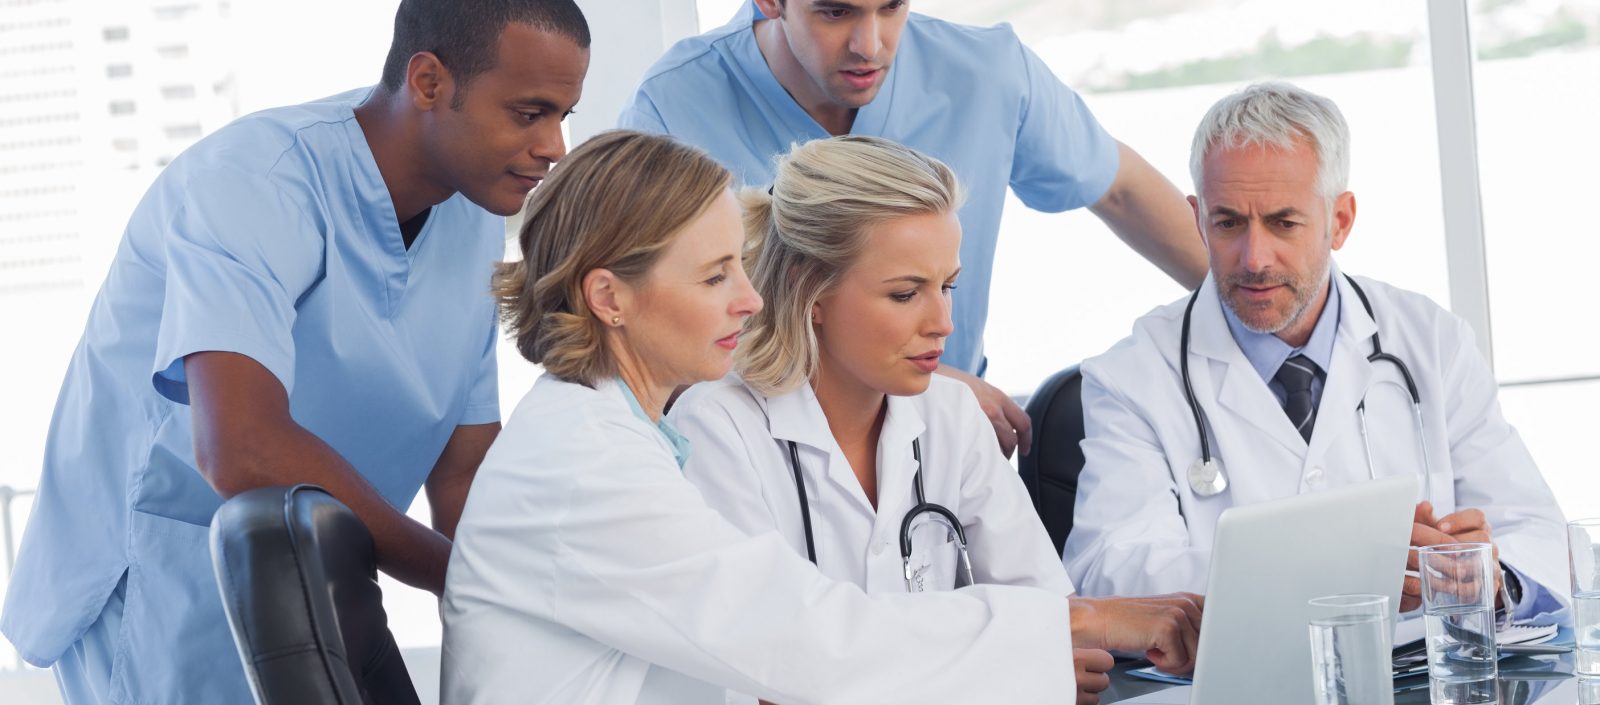 Improve morale at your medical practice for increased productivity.